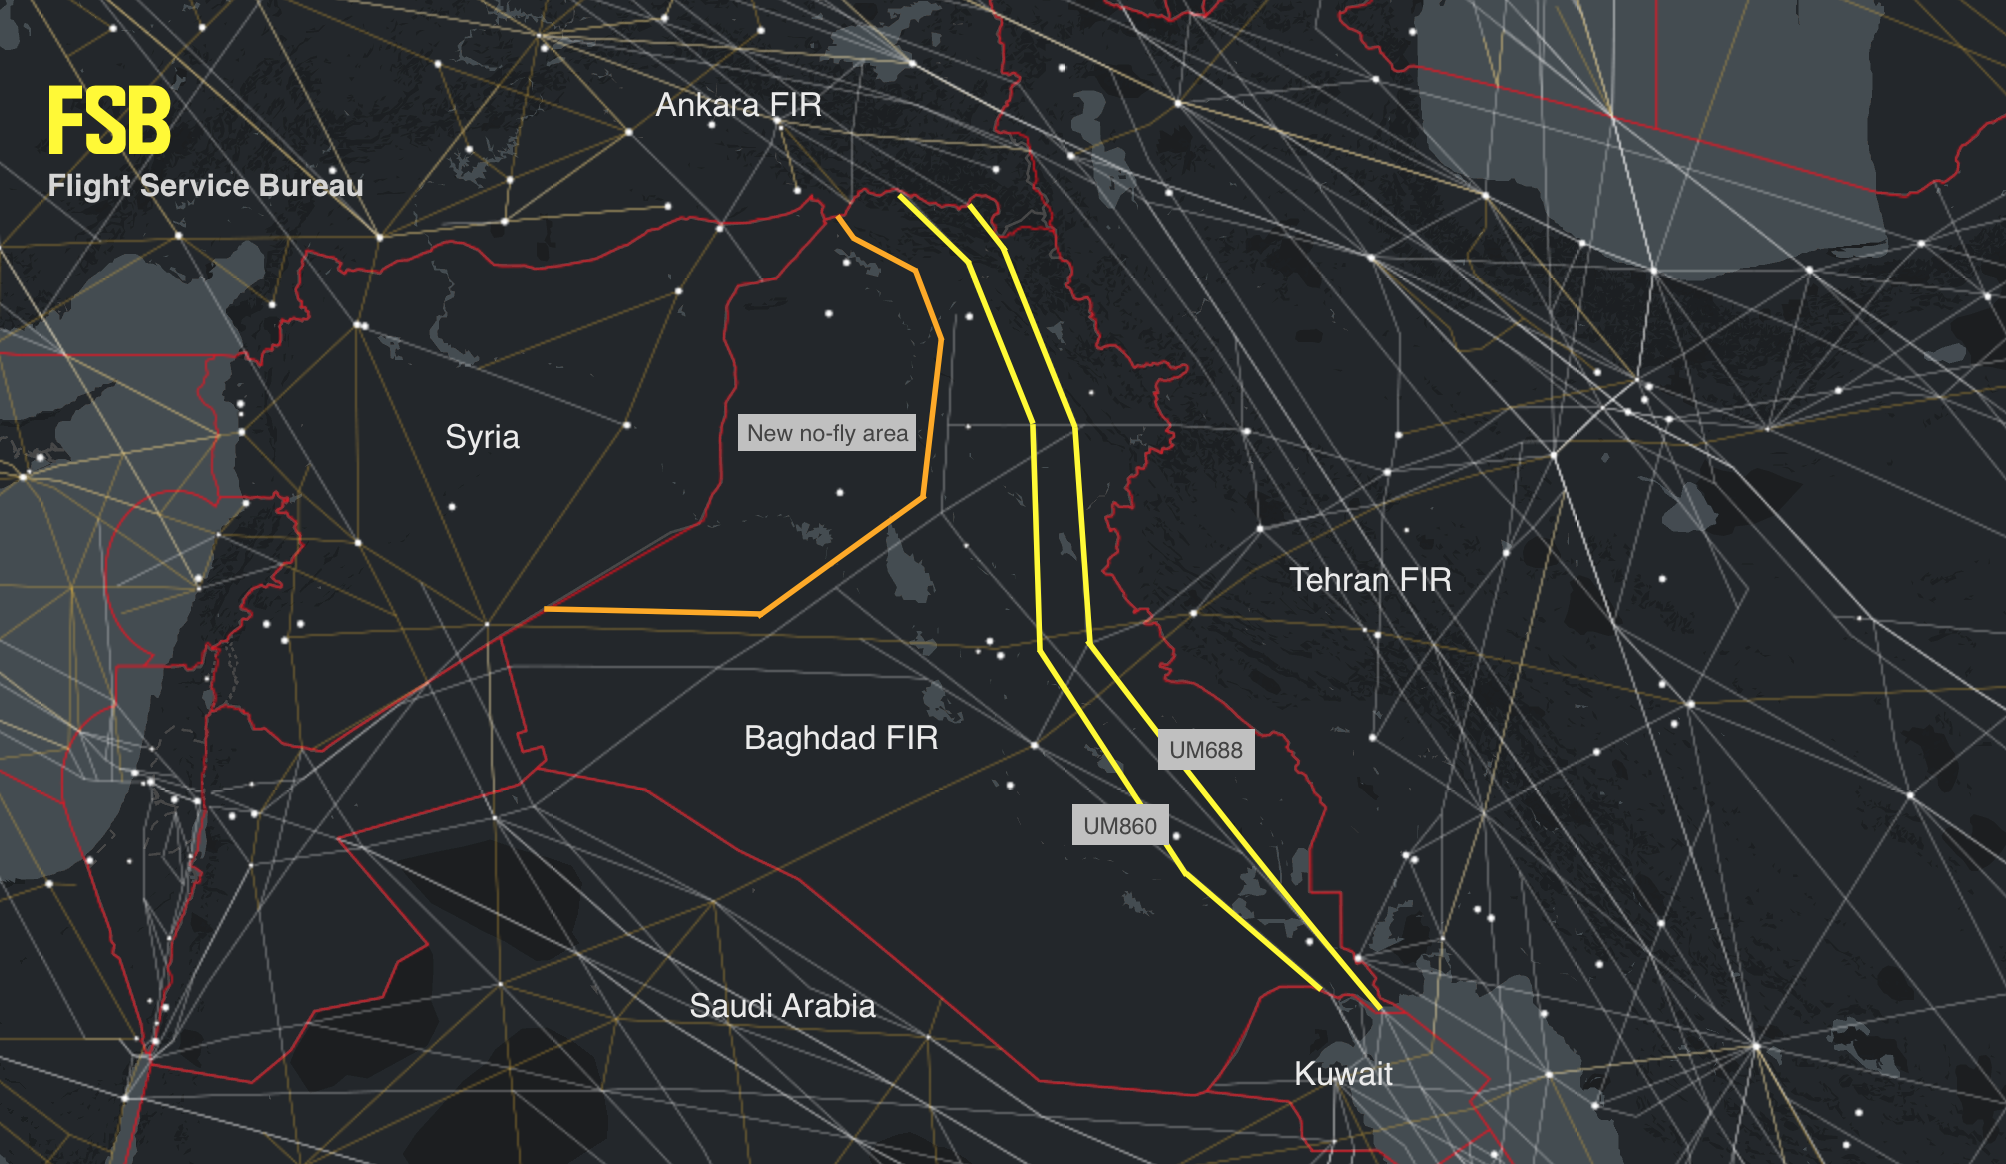 Western countries lift bans on Iraq airspace